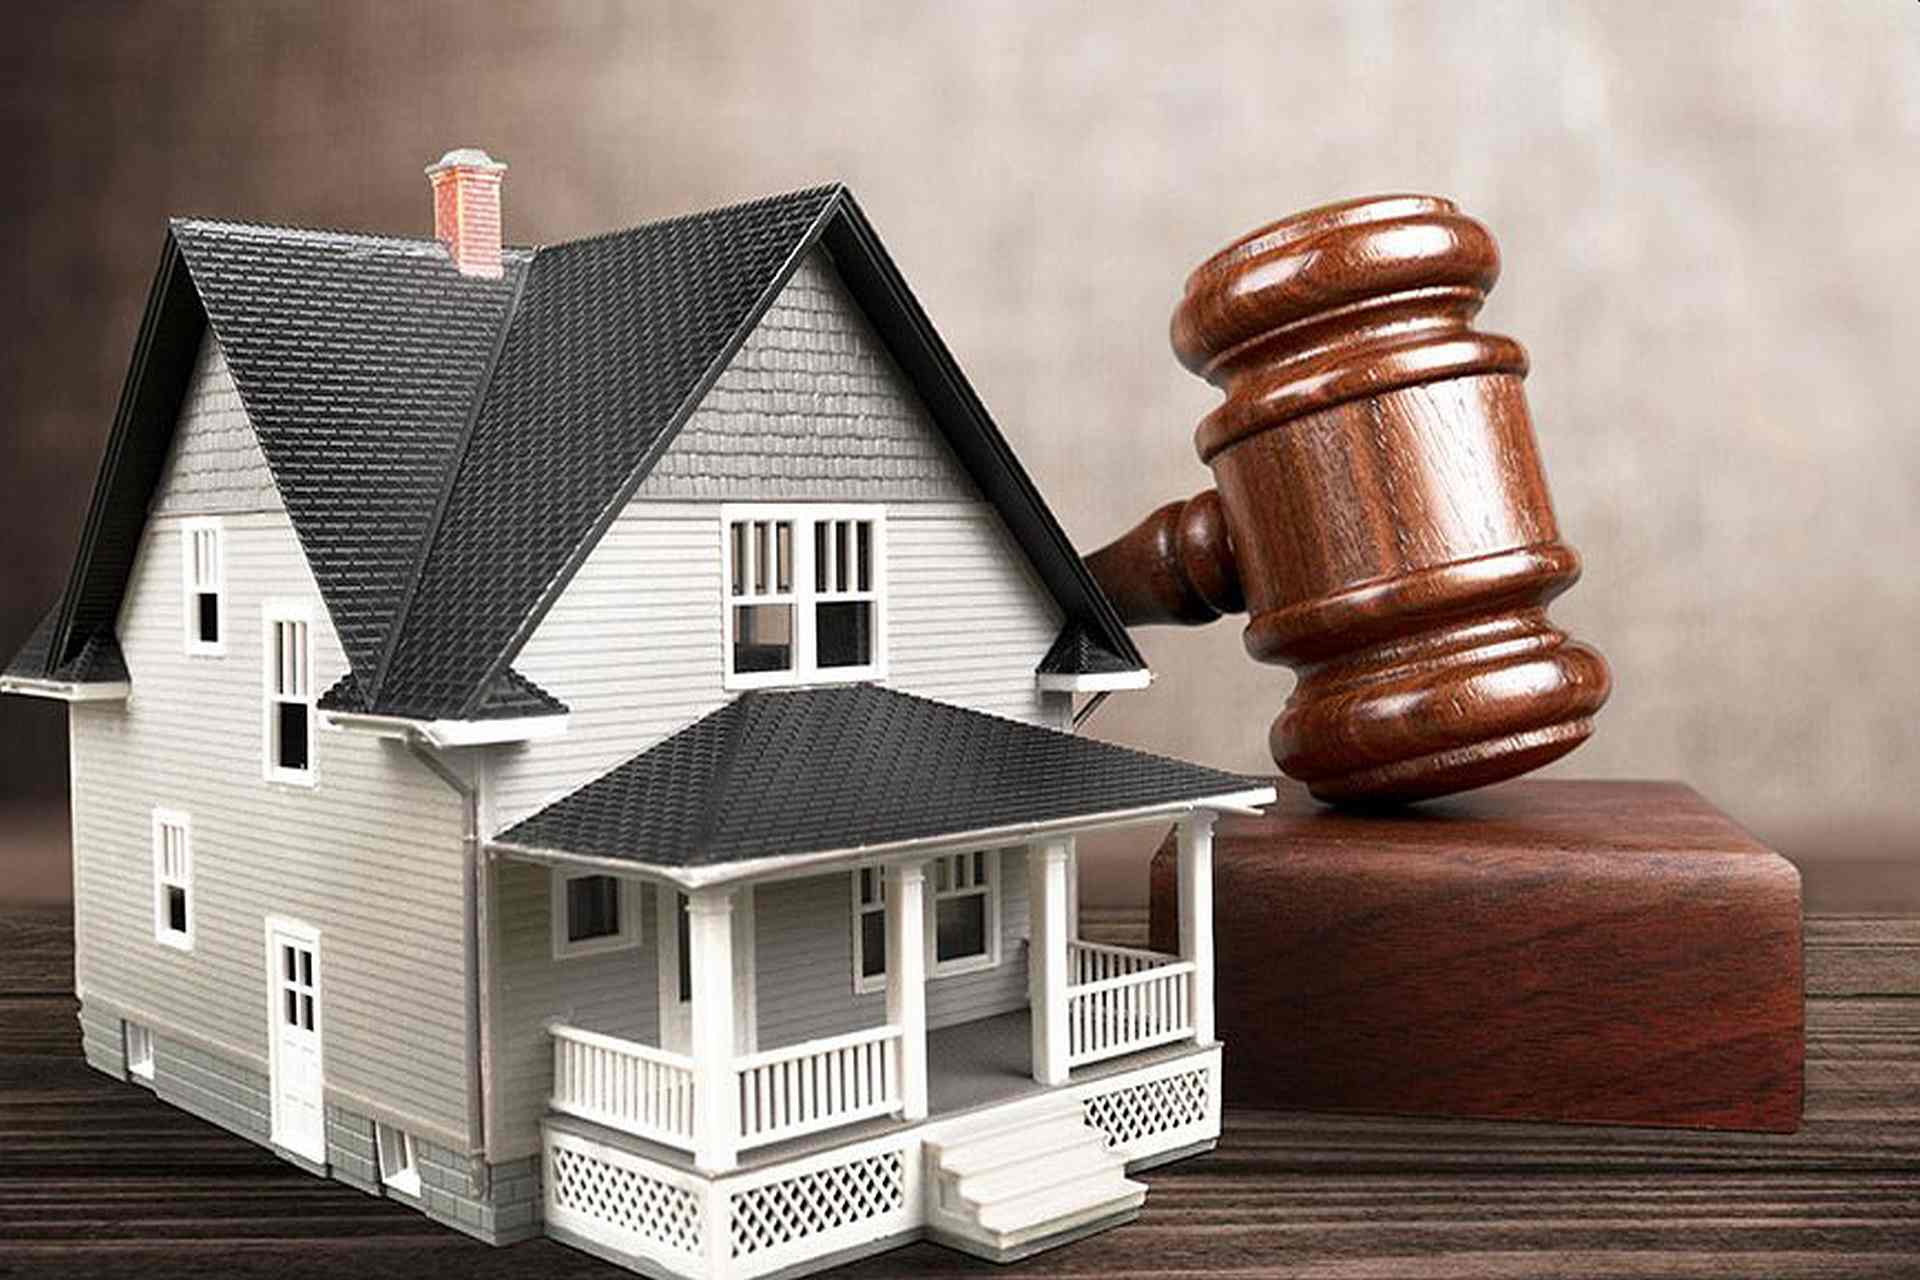 REAL ESTATE LAW